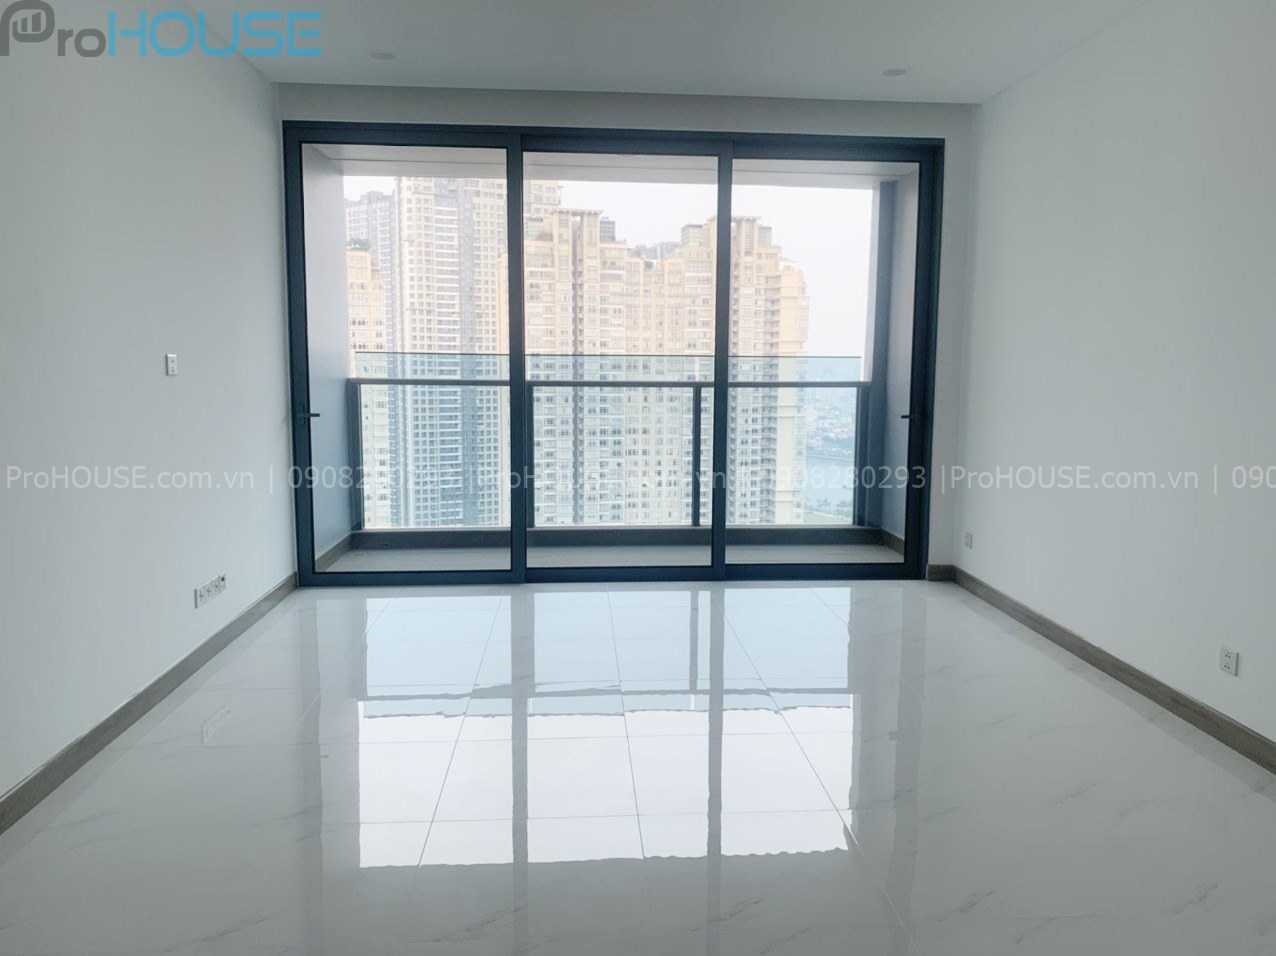 High-class apartment for rent with 3 bedrooms, basic furniture, high floor, northeast direction at Sunwah Pearl